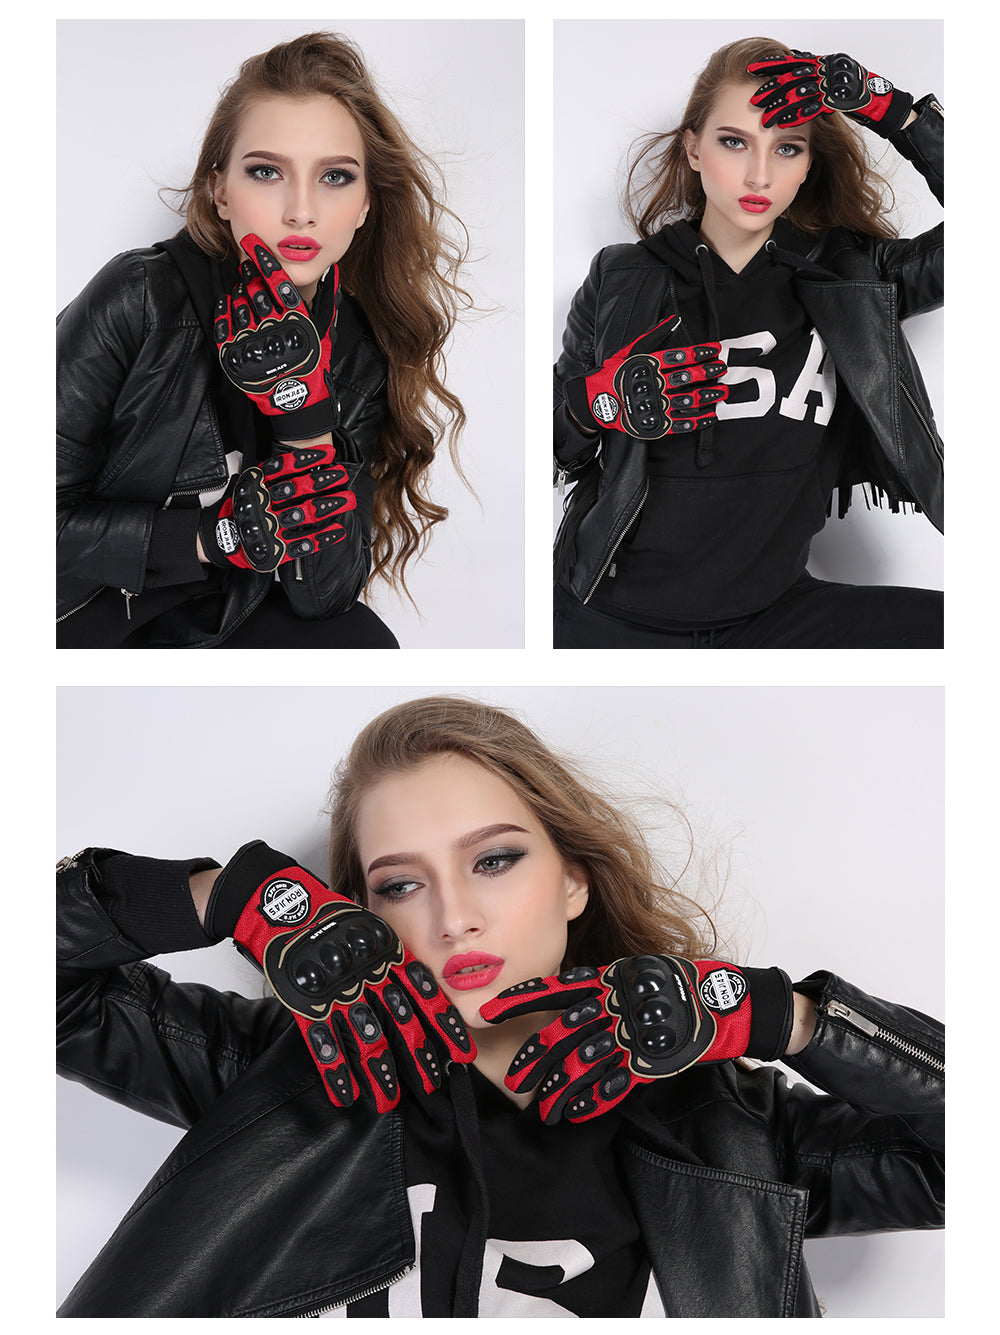 IRON JIA'S Motorcycle Gloves Men Summer Breathable Full Finger Motocross Guantes Protection Gear Motorbike Moto Riding Gloves